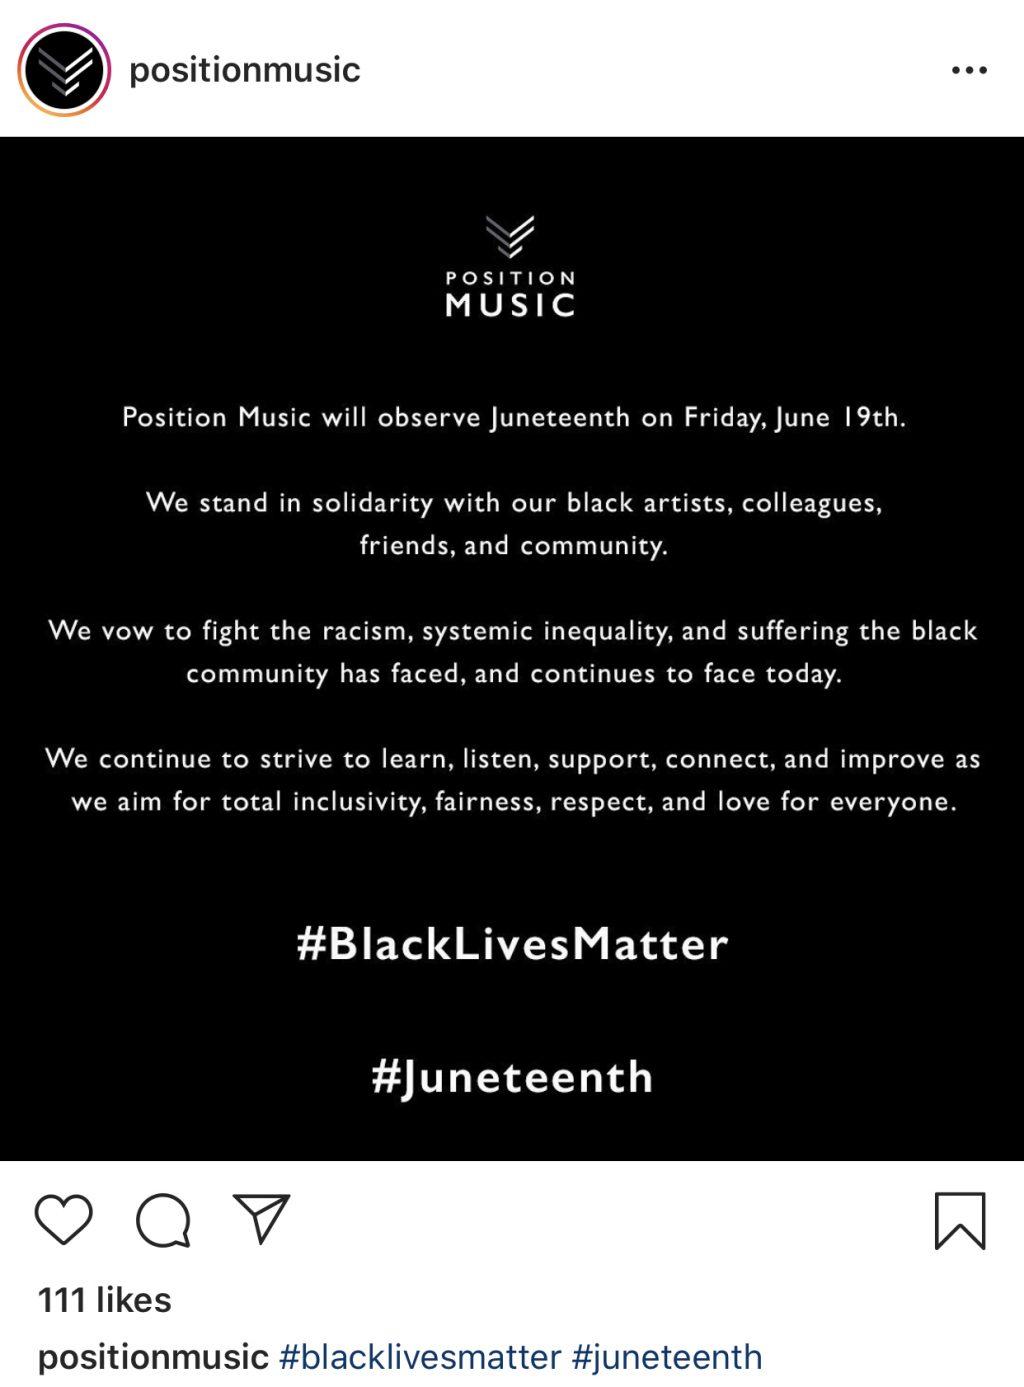 Position Music issues the above statement in observance of Juneteenth. Many companies in the music industry gave their employees the day off to observe the holiday celebrating the emancipation of slavery. Photo courtesy of Instagram